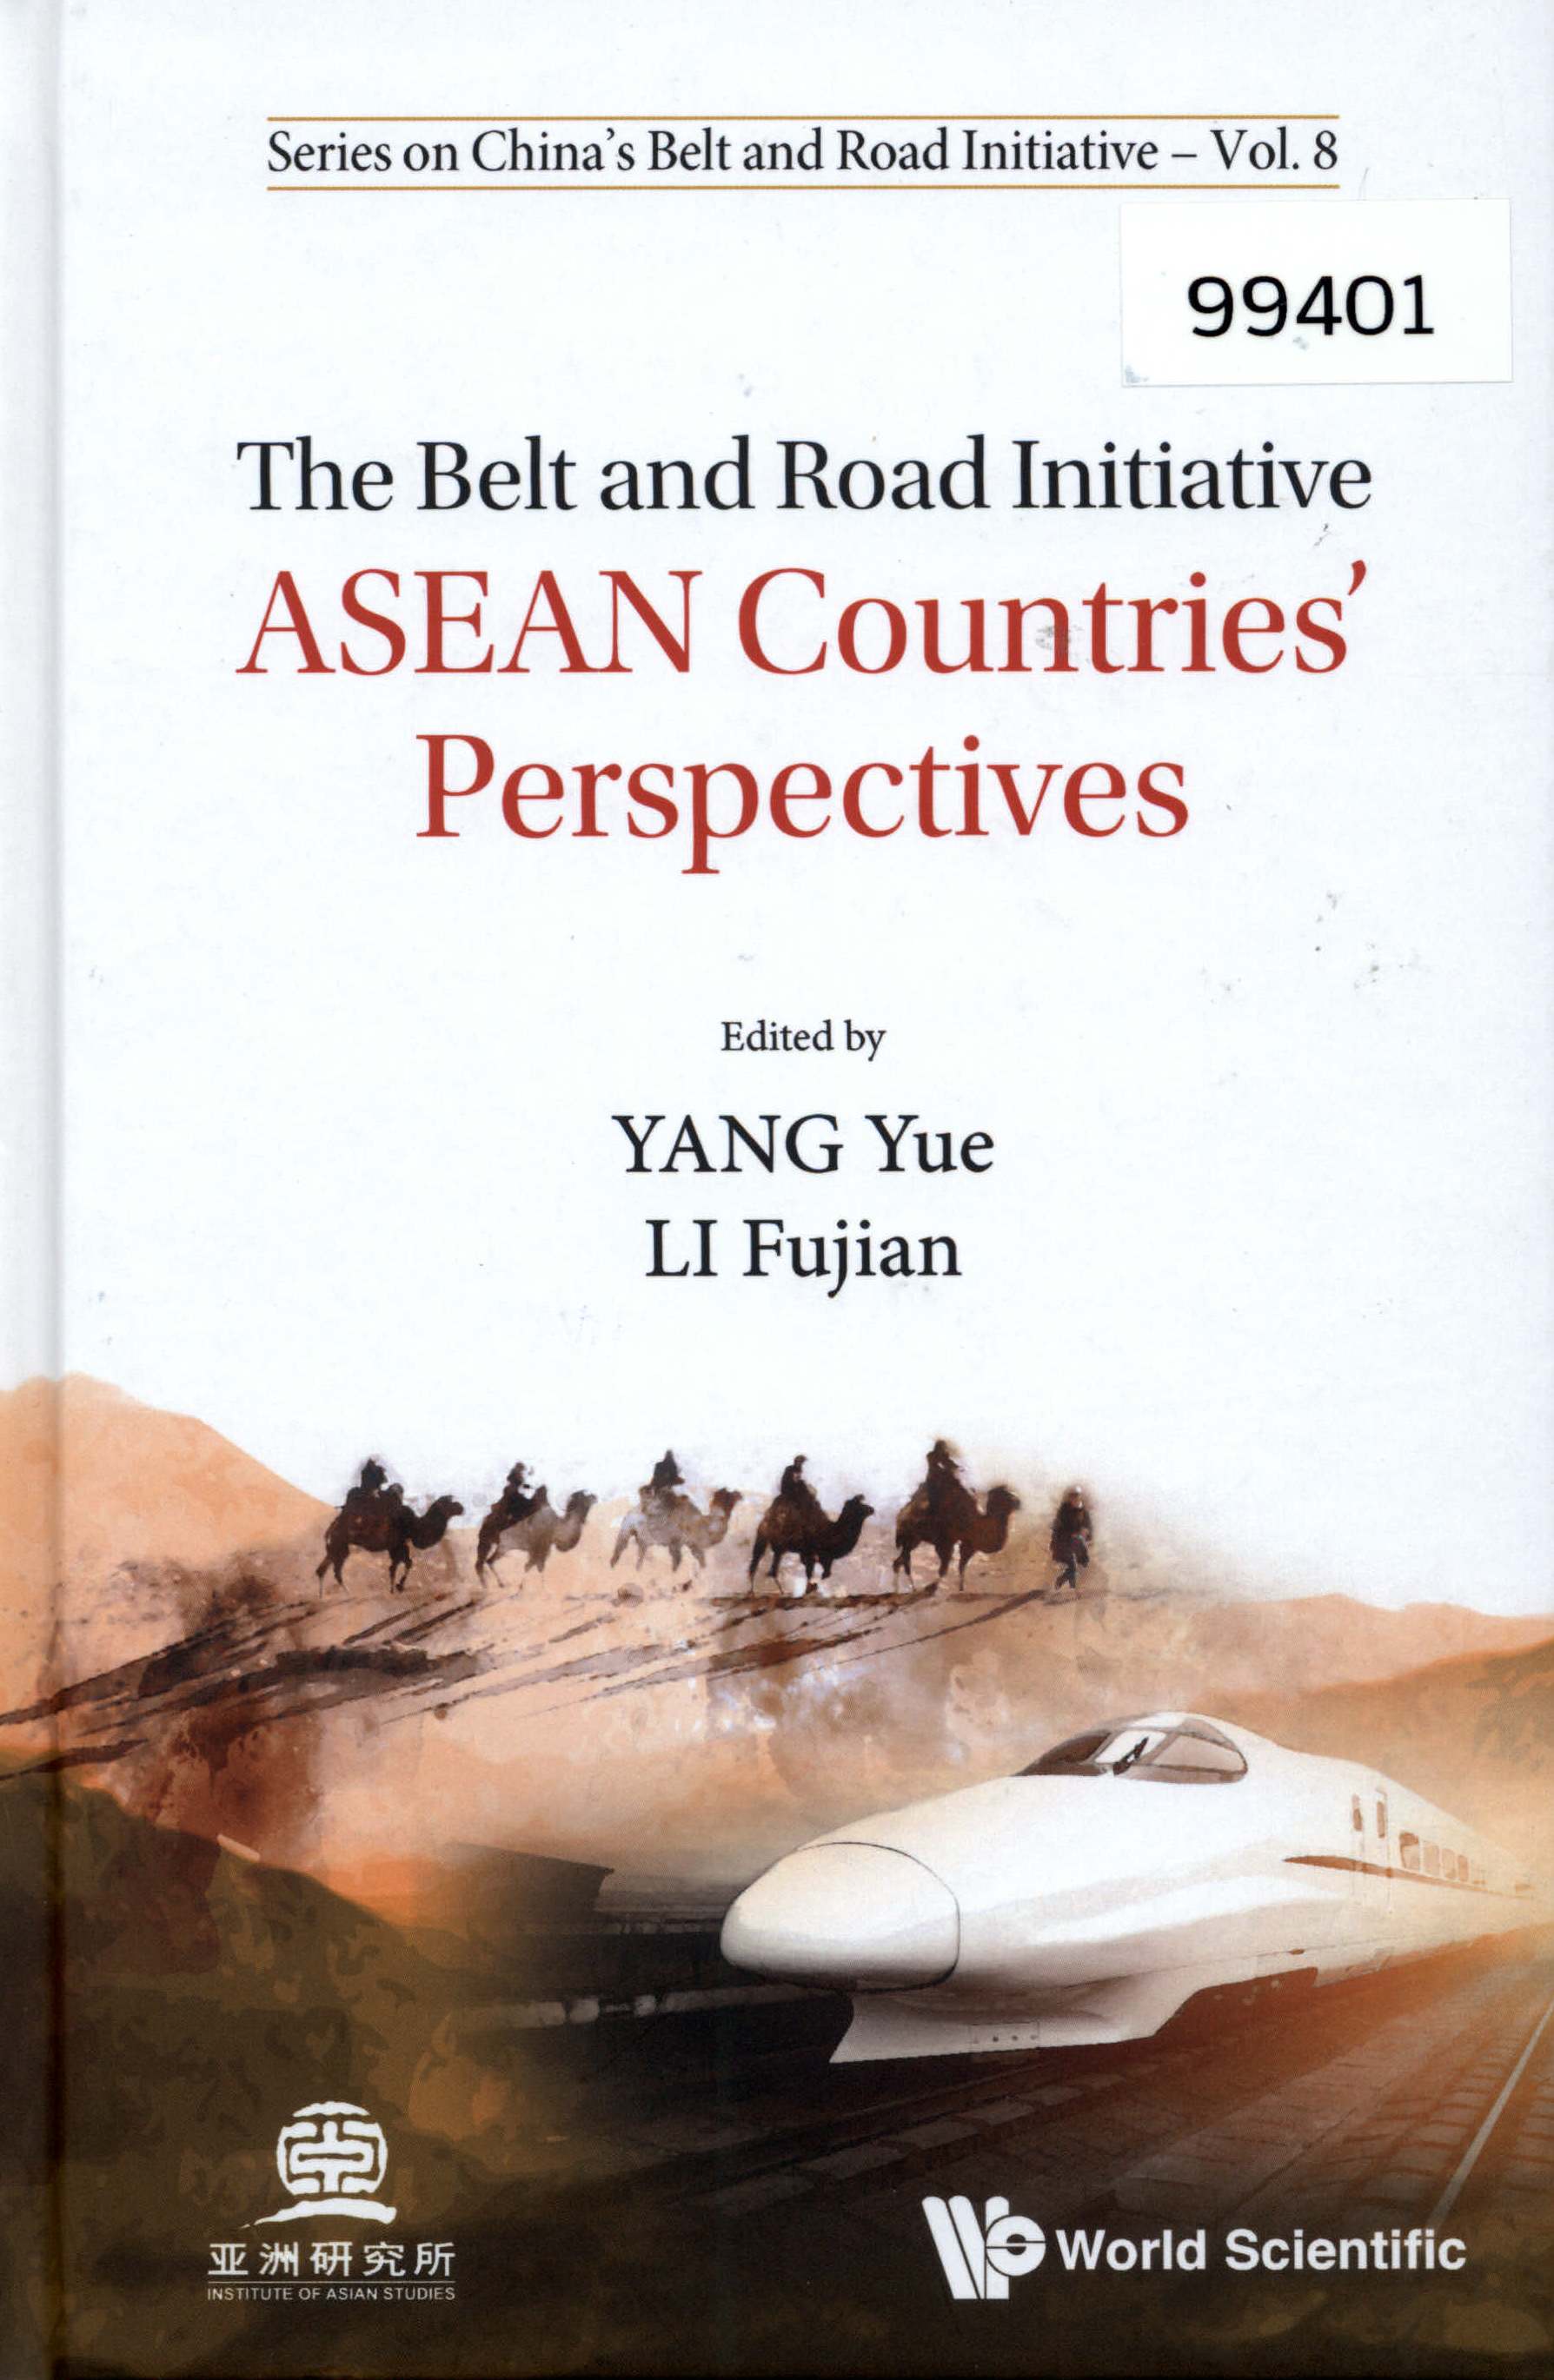 The Belt and Road Initiative: ASEAN Countries’ Perspective